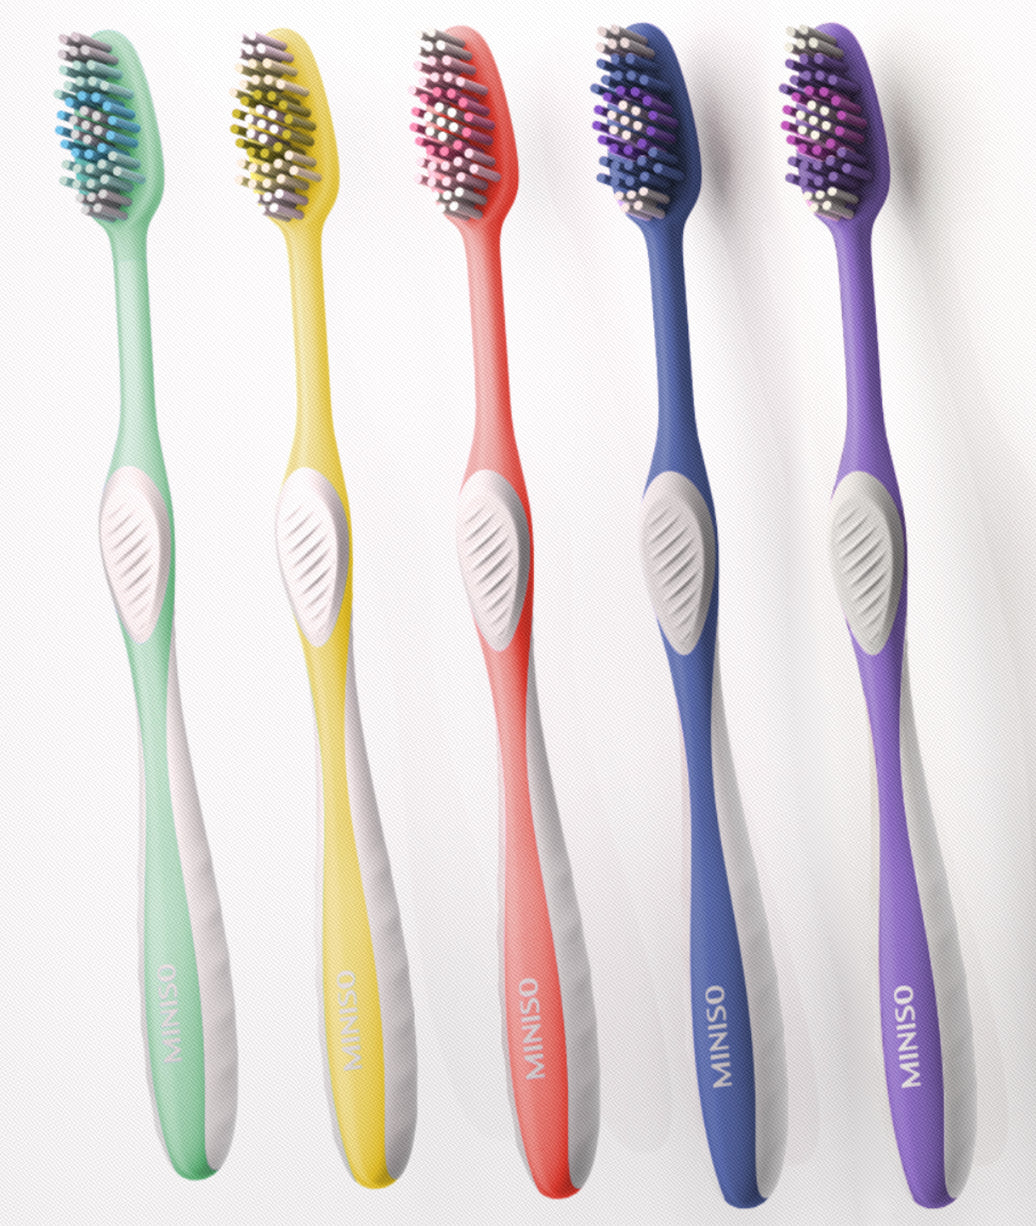 MINISO 360° DEEP CLEANING TOOTHBRUSHES ( 5 PACK ) 2011795010103 TOOTHBRUSH-2